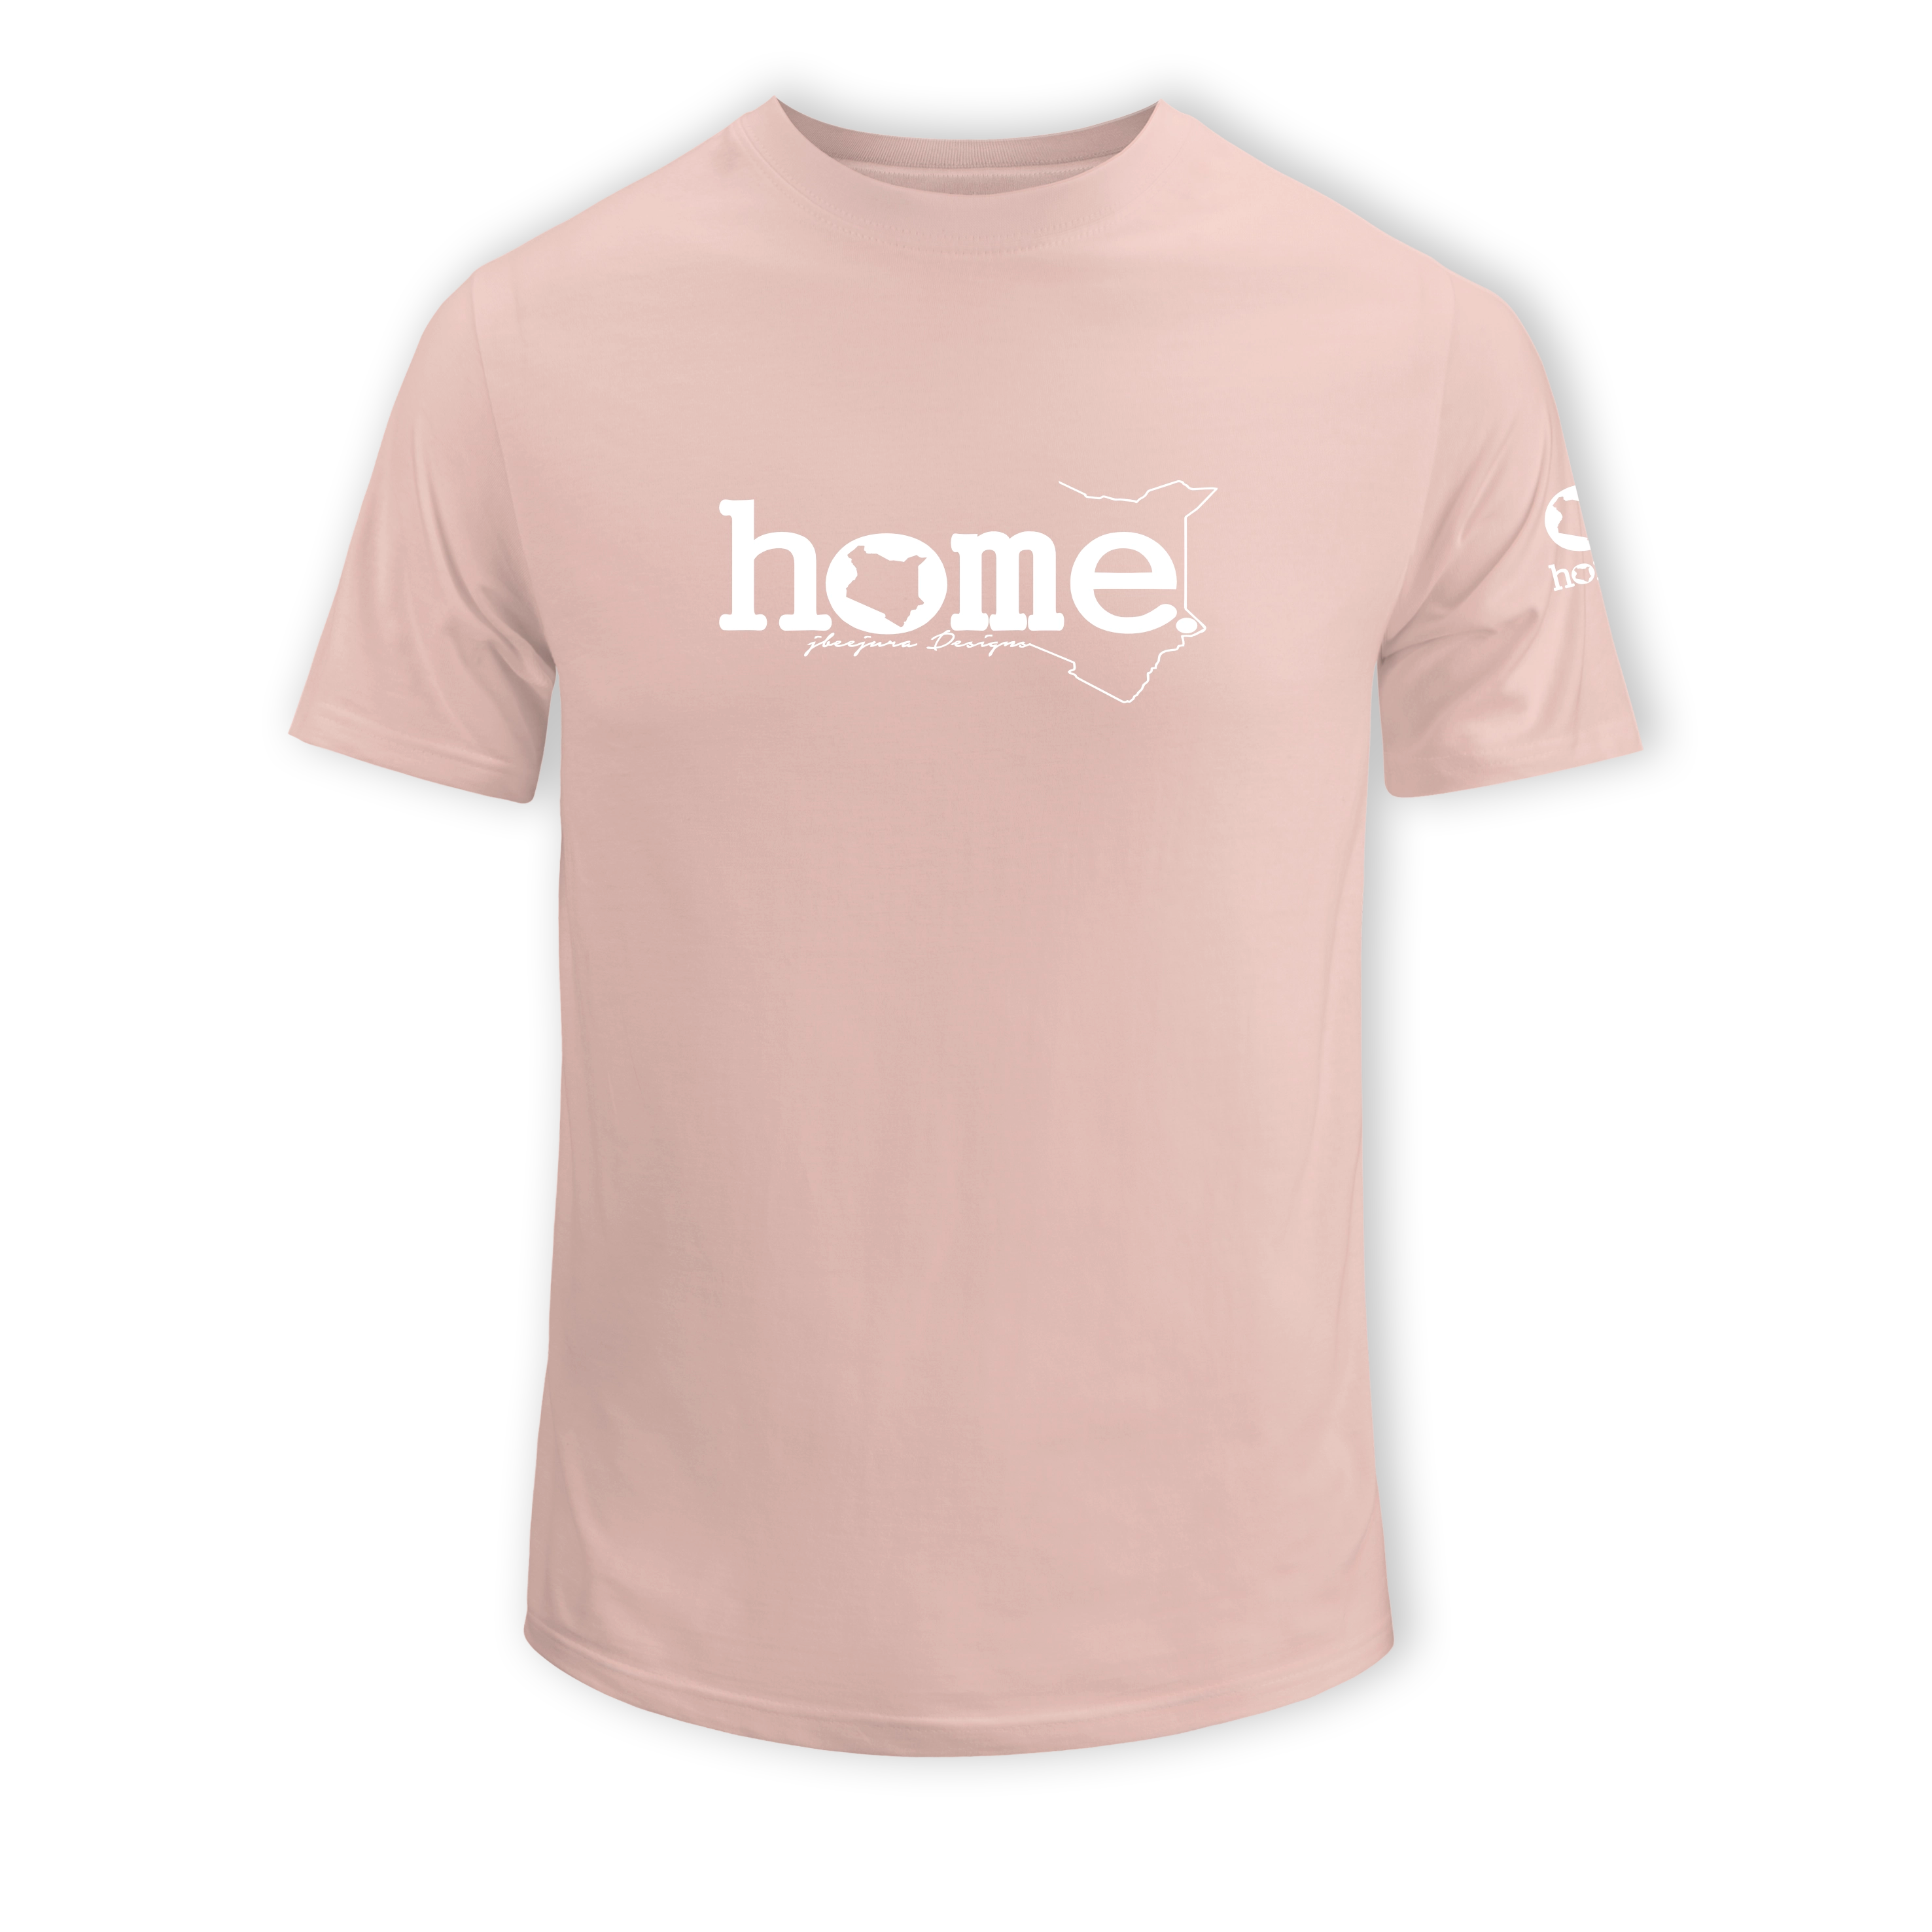 home_254 SHORT-SLEEVED PEACH T-SHIRT WITH A WHITE CLASSIC WORDS PRINT – COTTON PLUS FABRIC